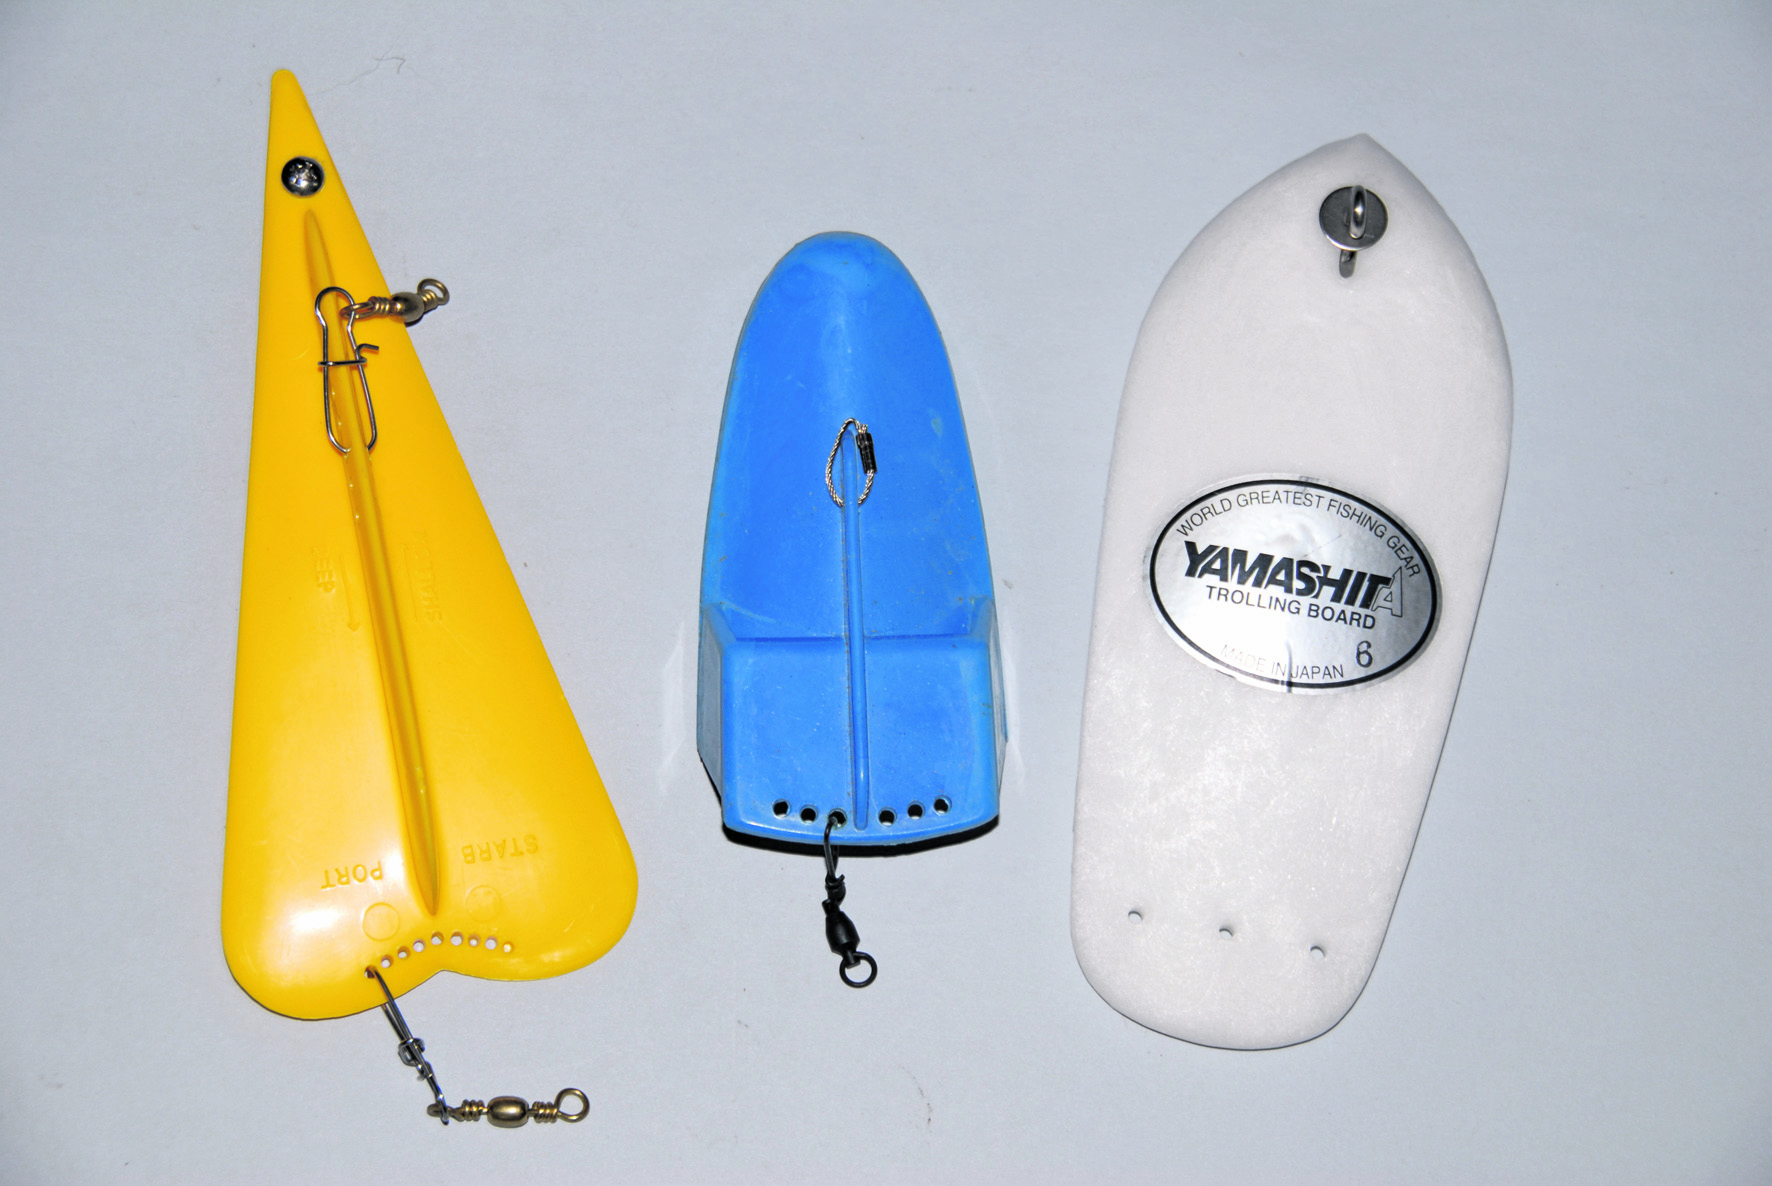 Tech Tricks: Rigging paravanes and trolling boards